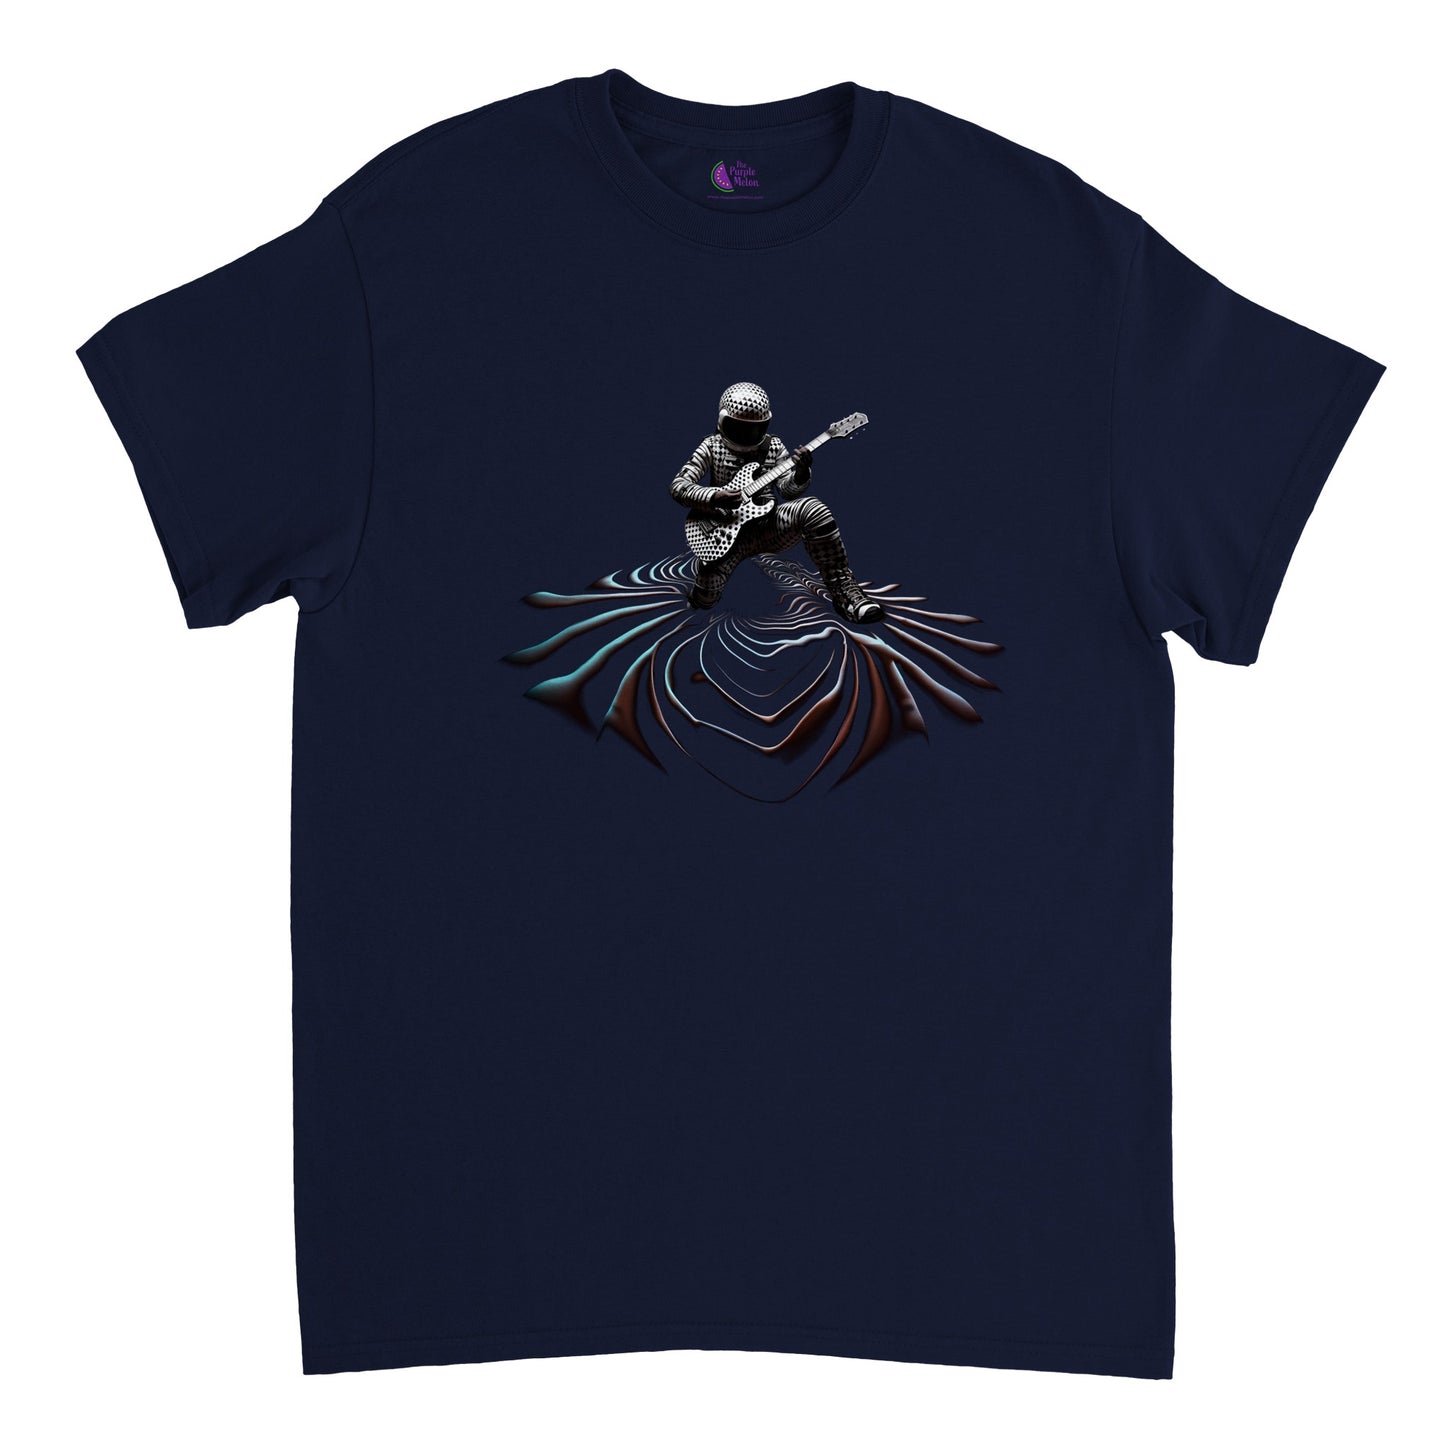 Navy blue t-shirt with a guitar playing spaceman print